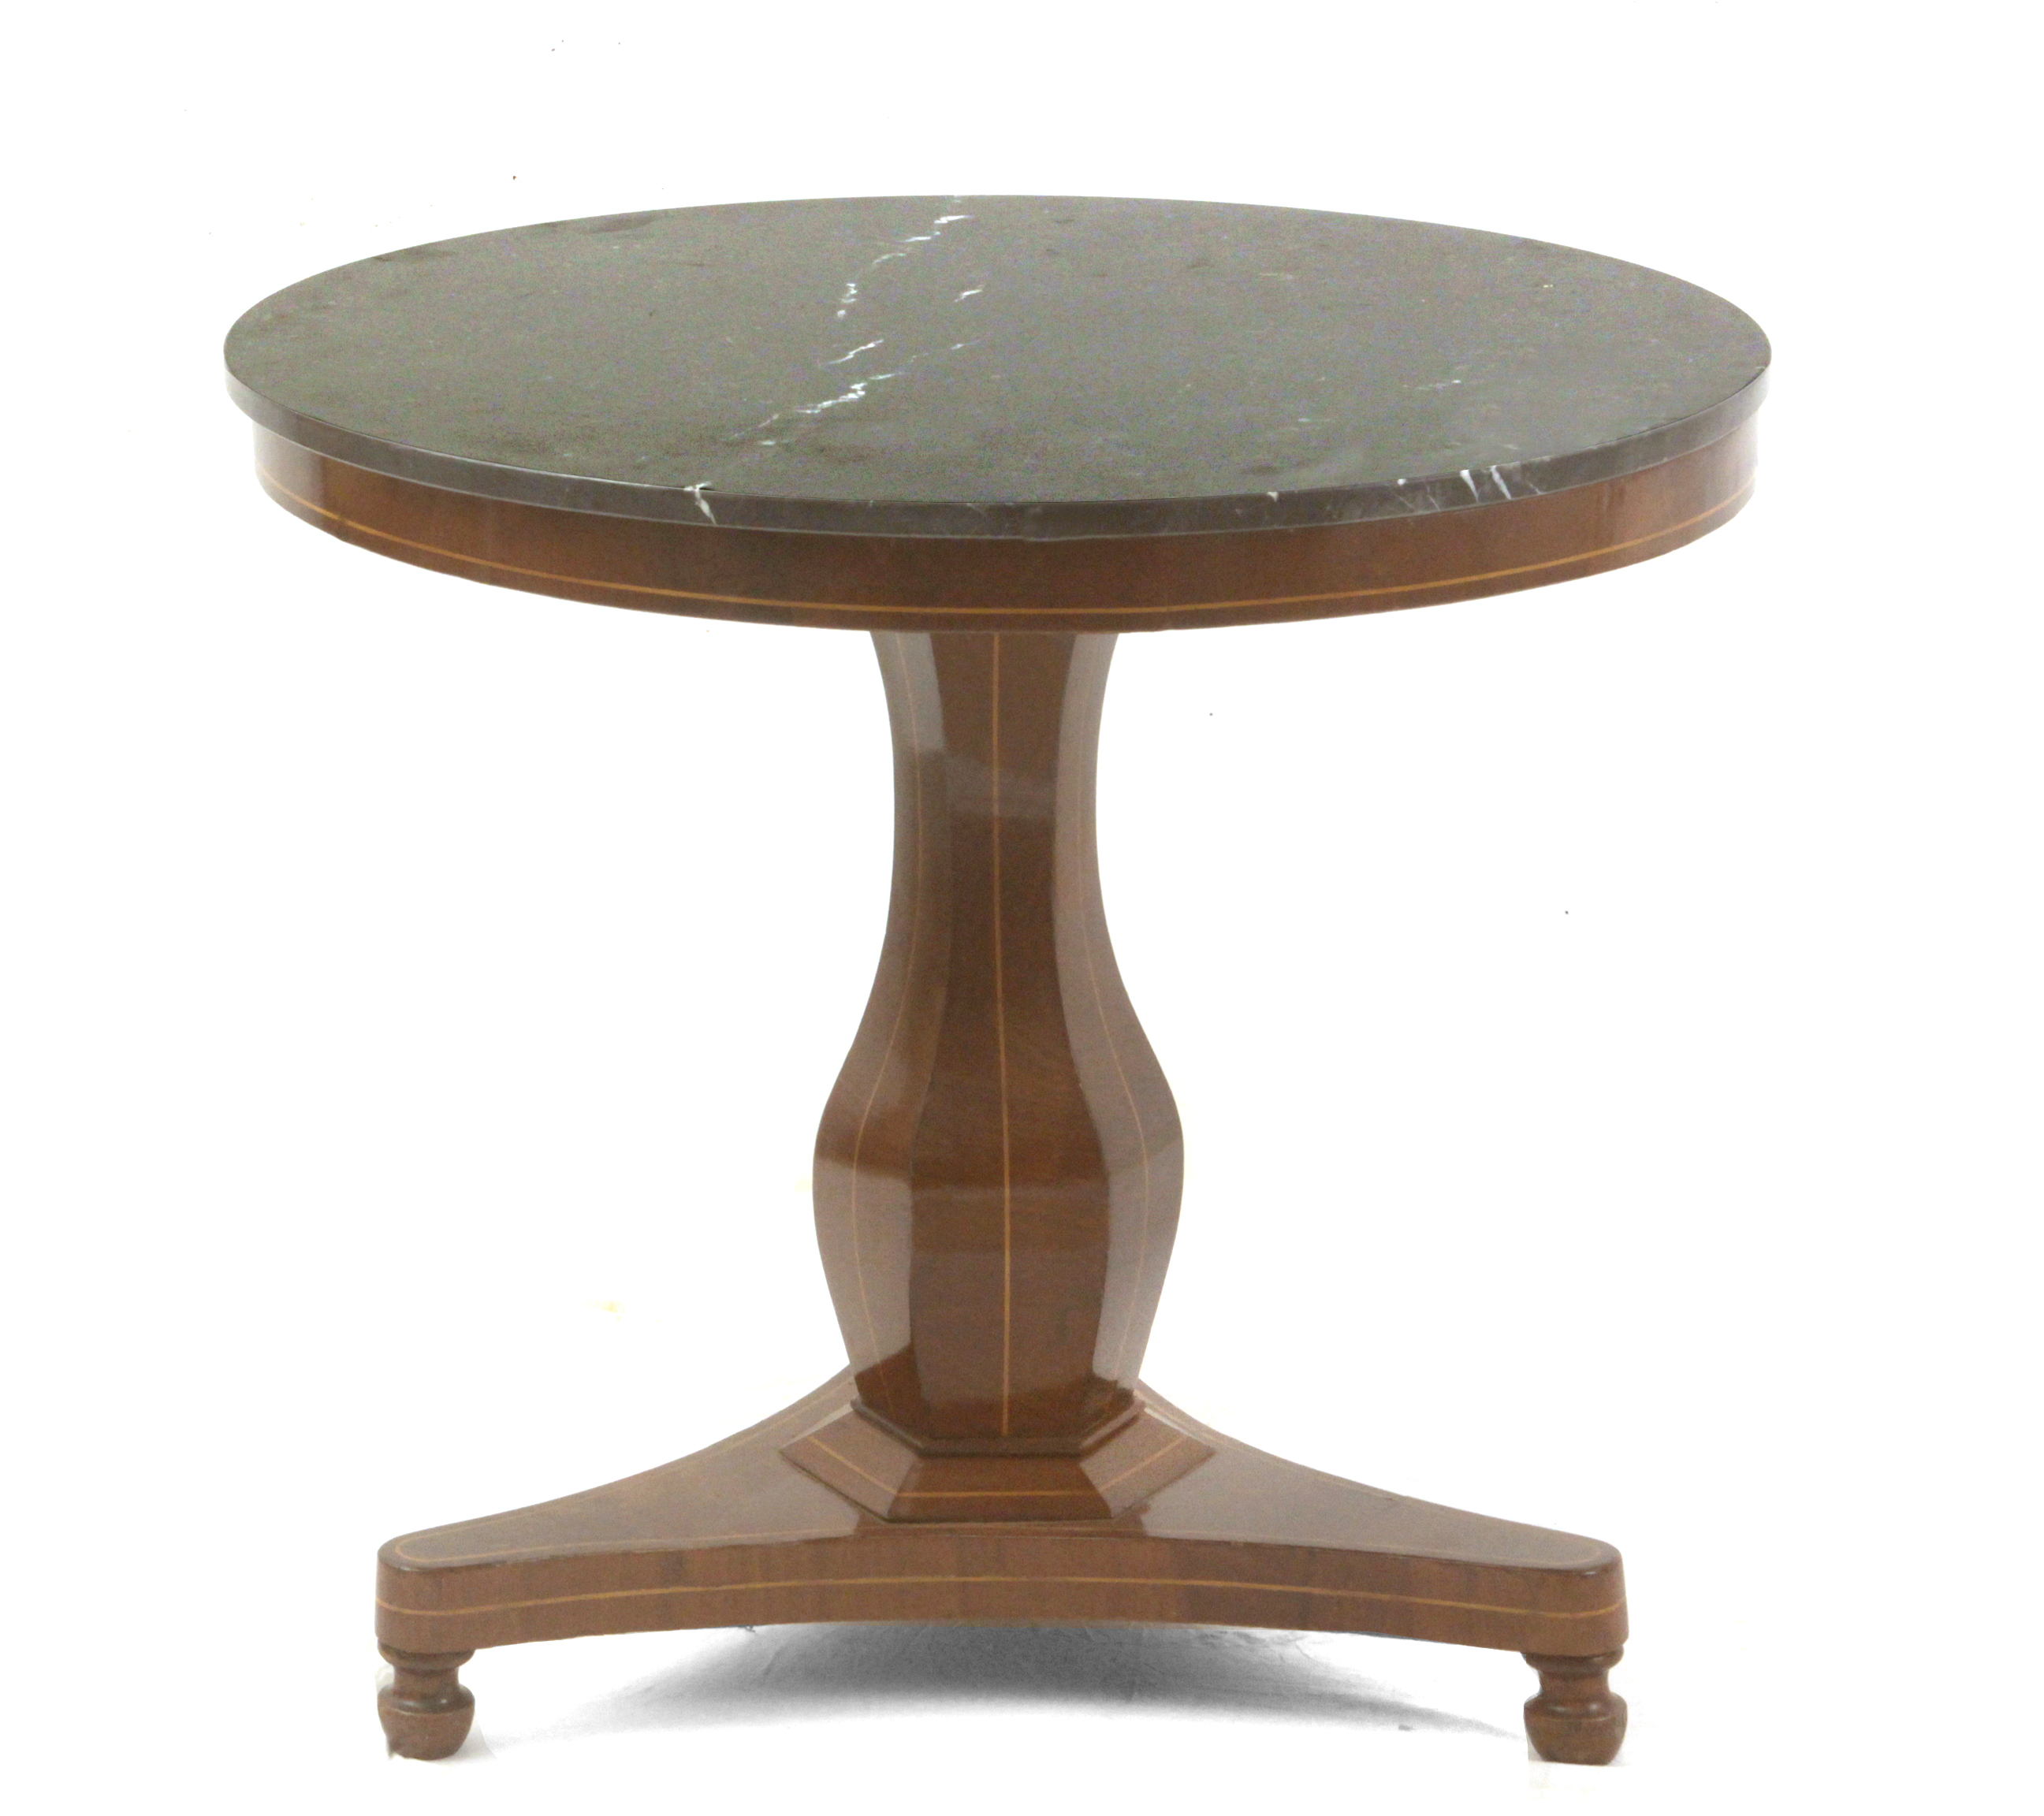 A French Restoration period mahogany side table - Image 2 of 4